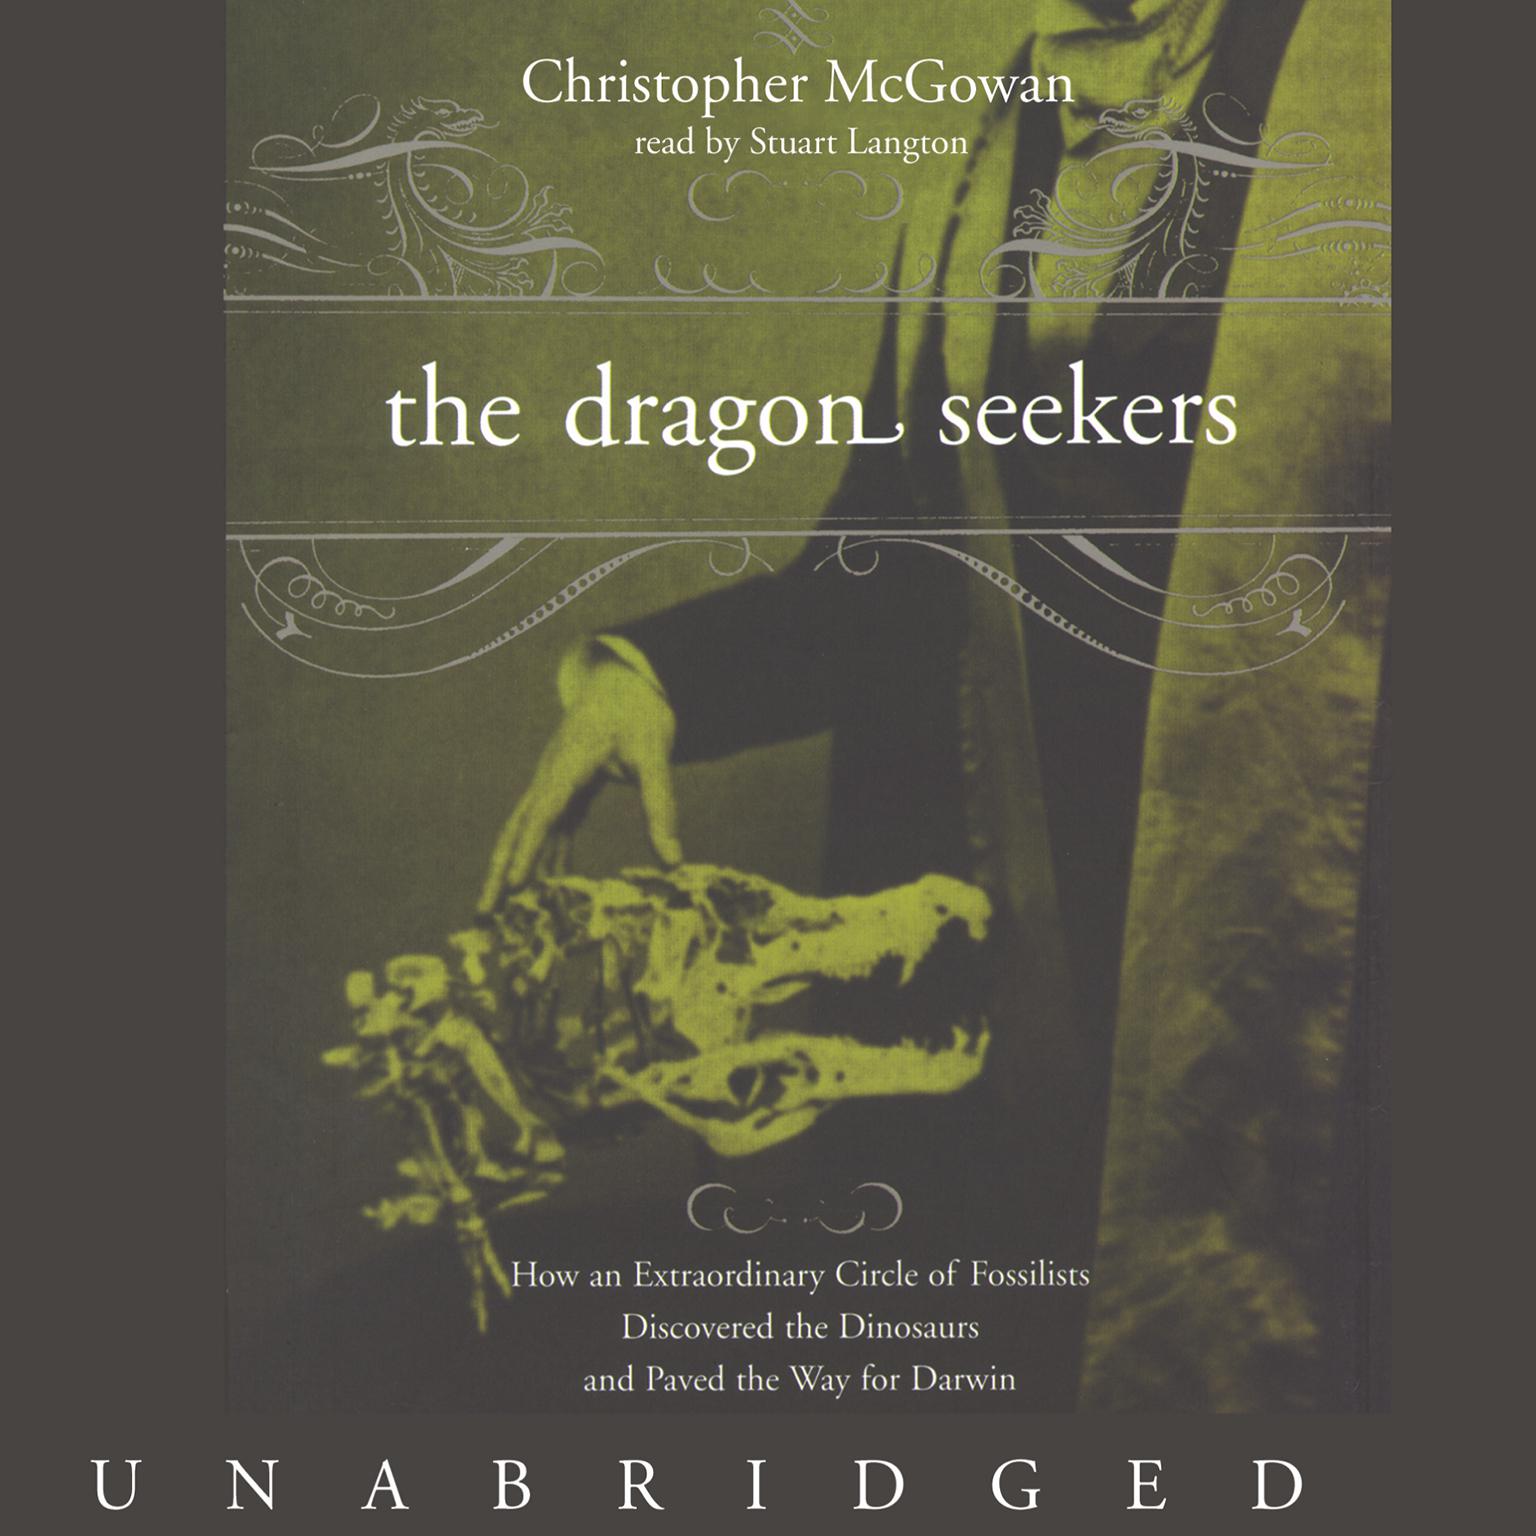 The Dragon Seekers: How an Extraordinary Circle of Fossilists Discovered the Dinosaurs and Paved the Way for Darwin Audiobook, by Christopher McGowan